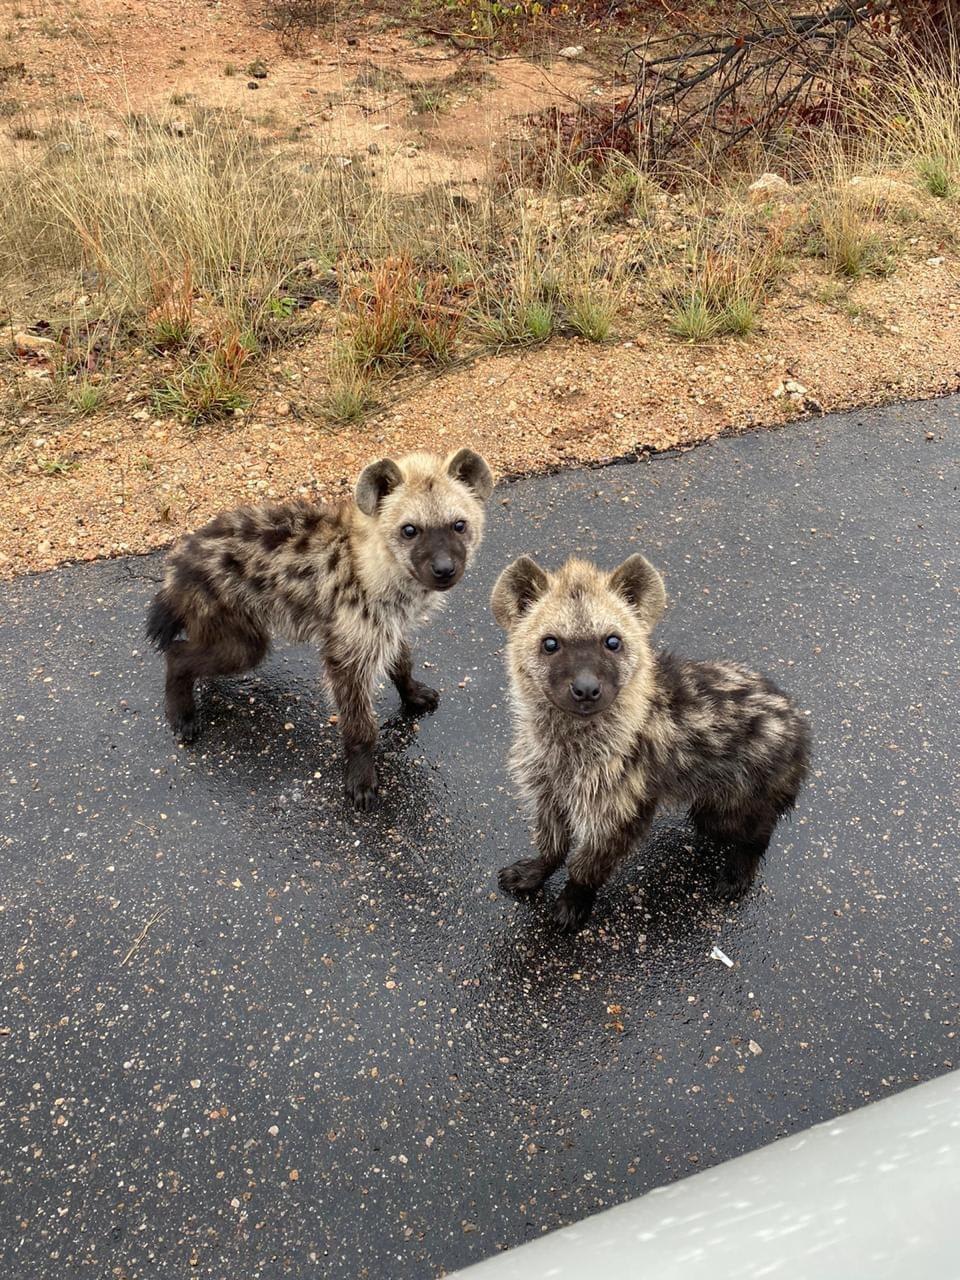 In case you needed it today, here are some hyena cubs